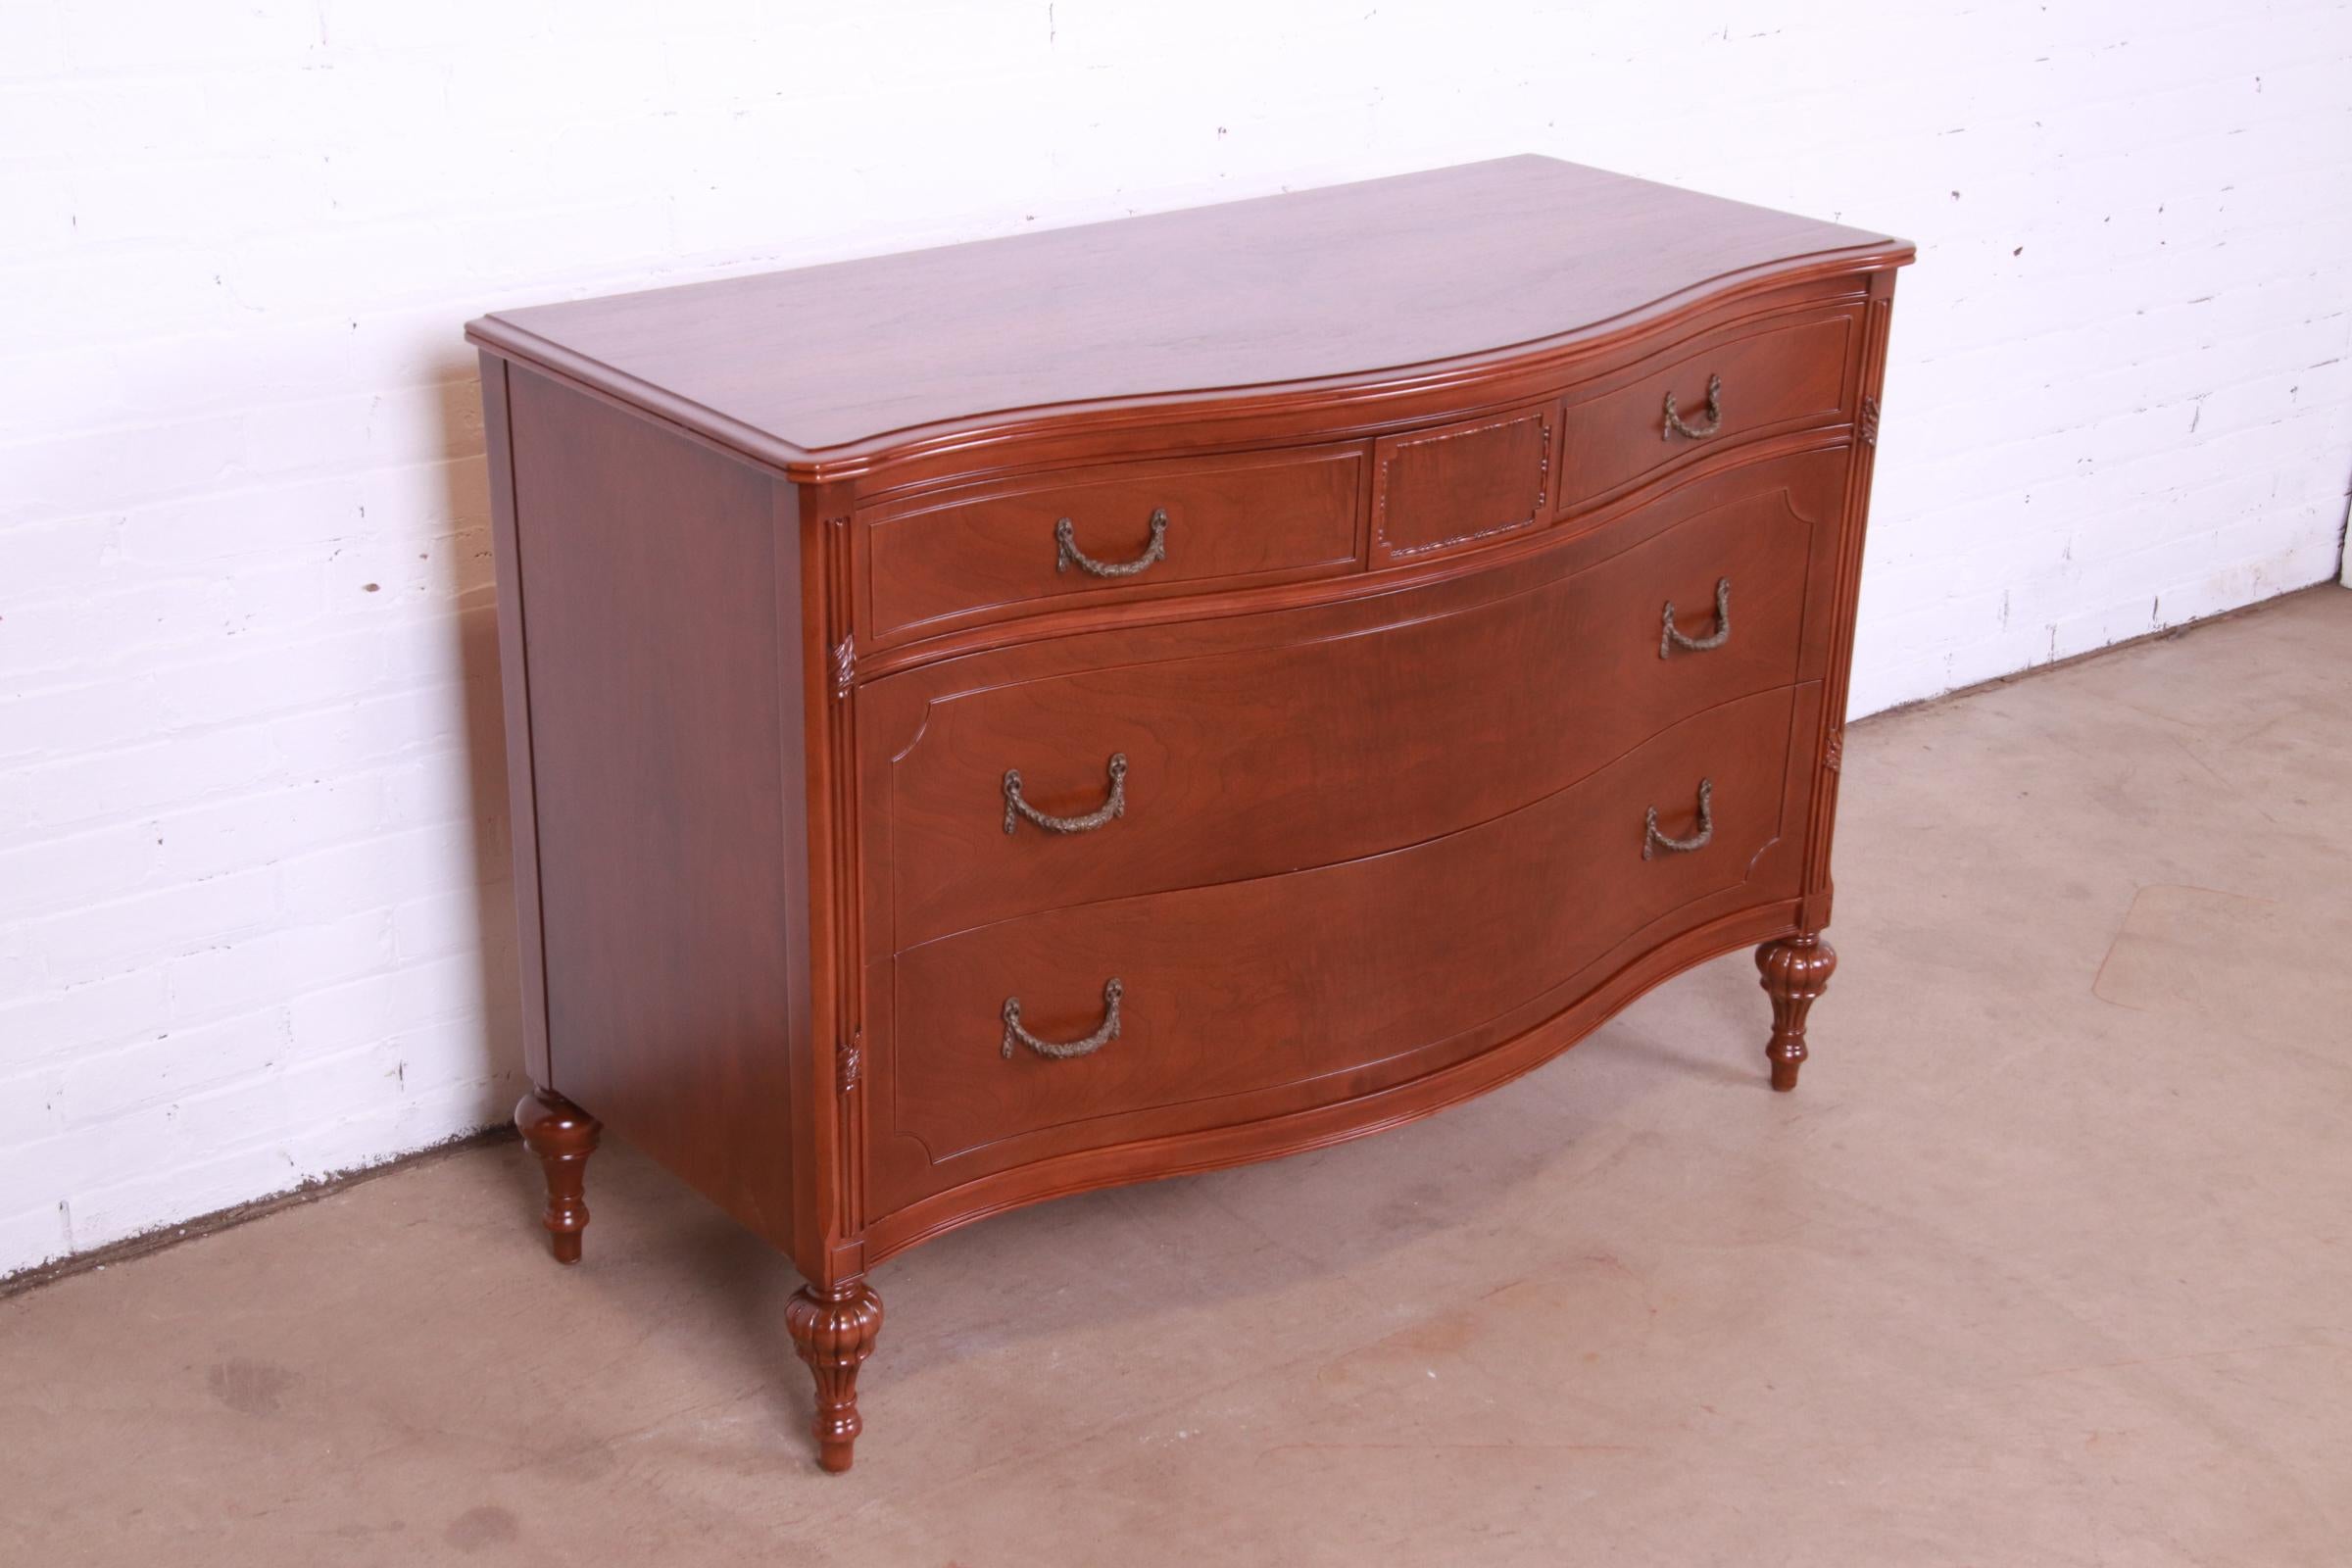 Widdicomb French Regency Louis XVI Burled Walnut Bow Front Dresser, circa 1920s In Good Condition For Sale In South Bend, IN